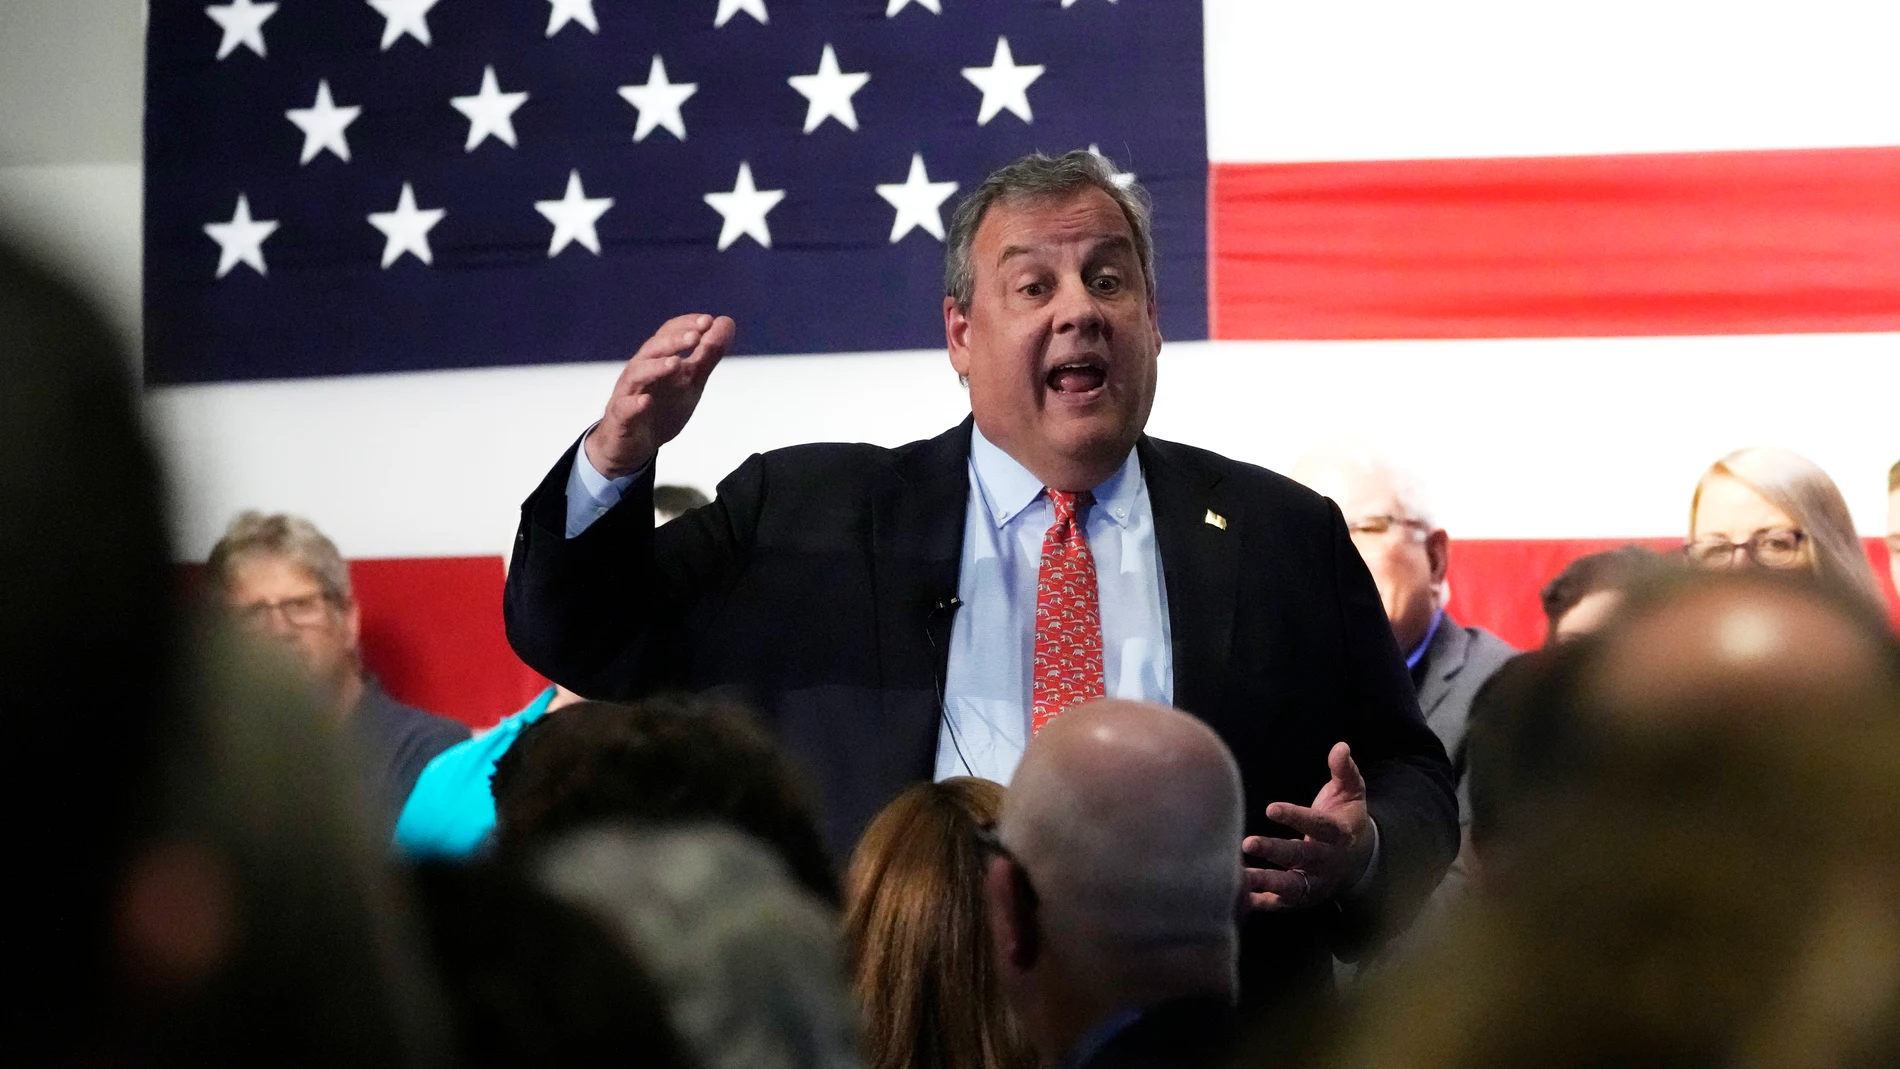 Republican Presidential candidate former, New Jersey Gov. Chris Christie addresses a gathering, Tuesday, June 6, 2023, in Manchester, N.H. Christie filed paperwork Tuesday formally launching his bid for the Republican nomination for president after casting himself as the only candidate willing to directly take on former President Donald Trump. (AP Photo/Charles Krupa)